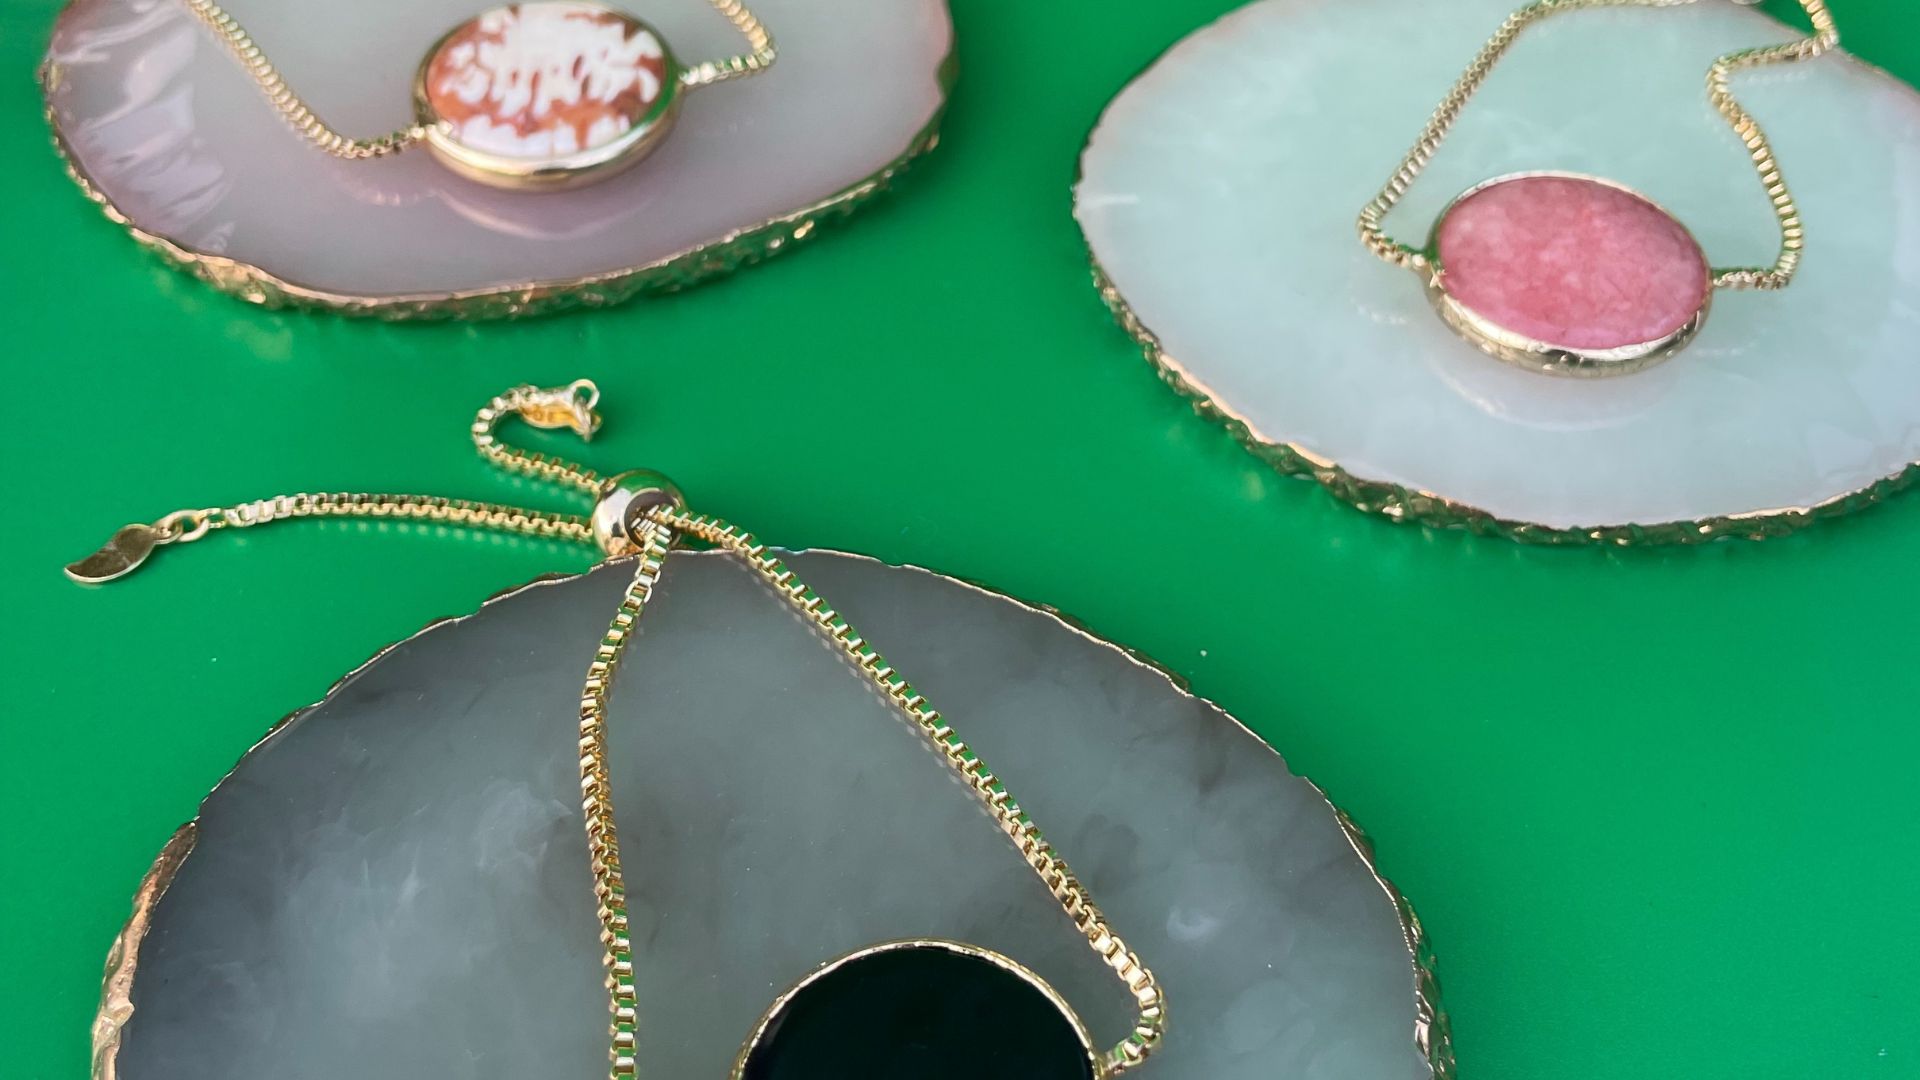 10 Tips You Need To Care For Your Semi-Precious Stones